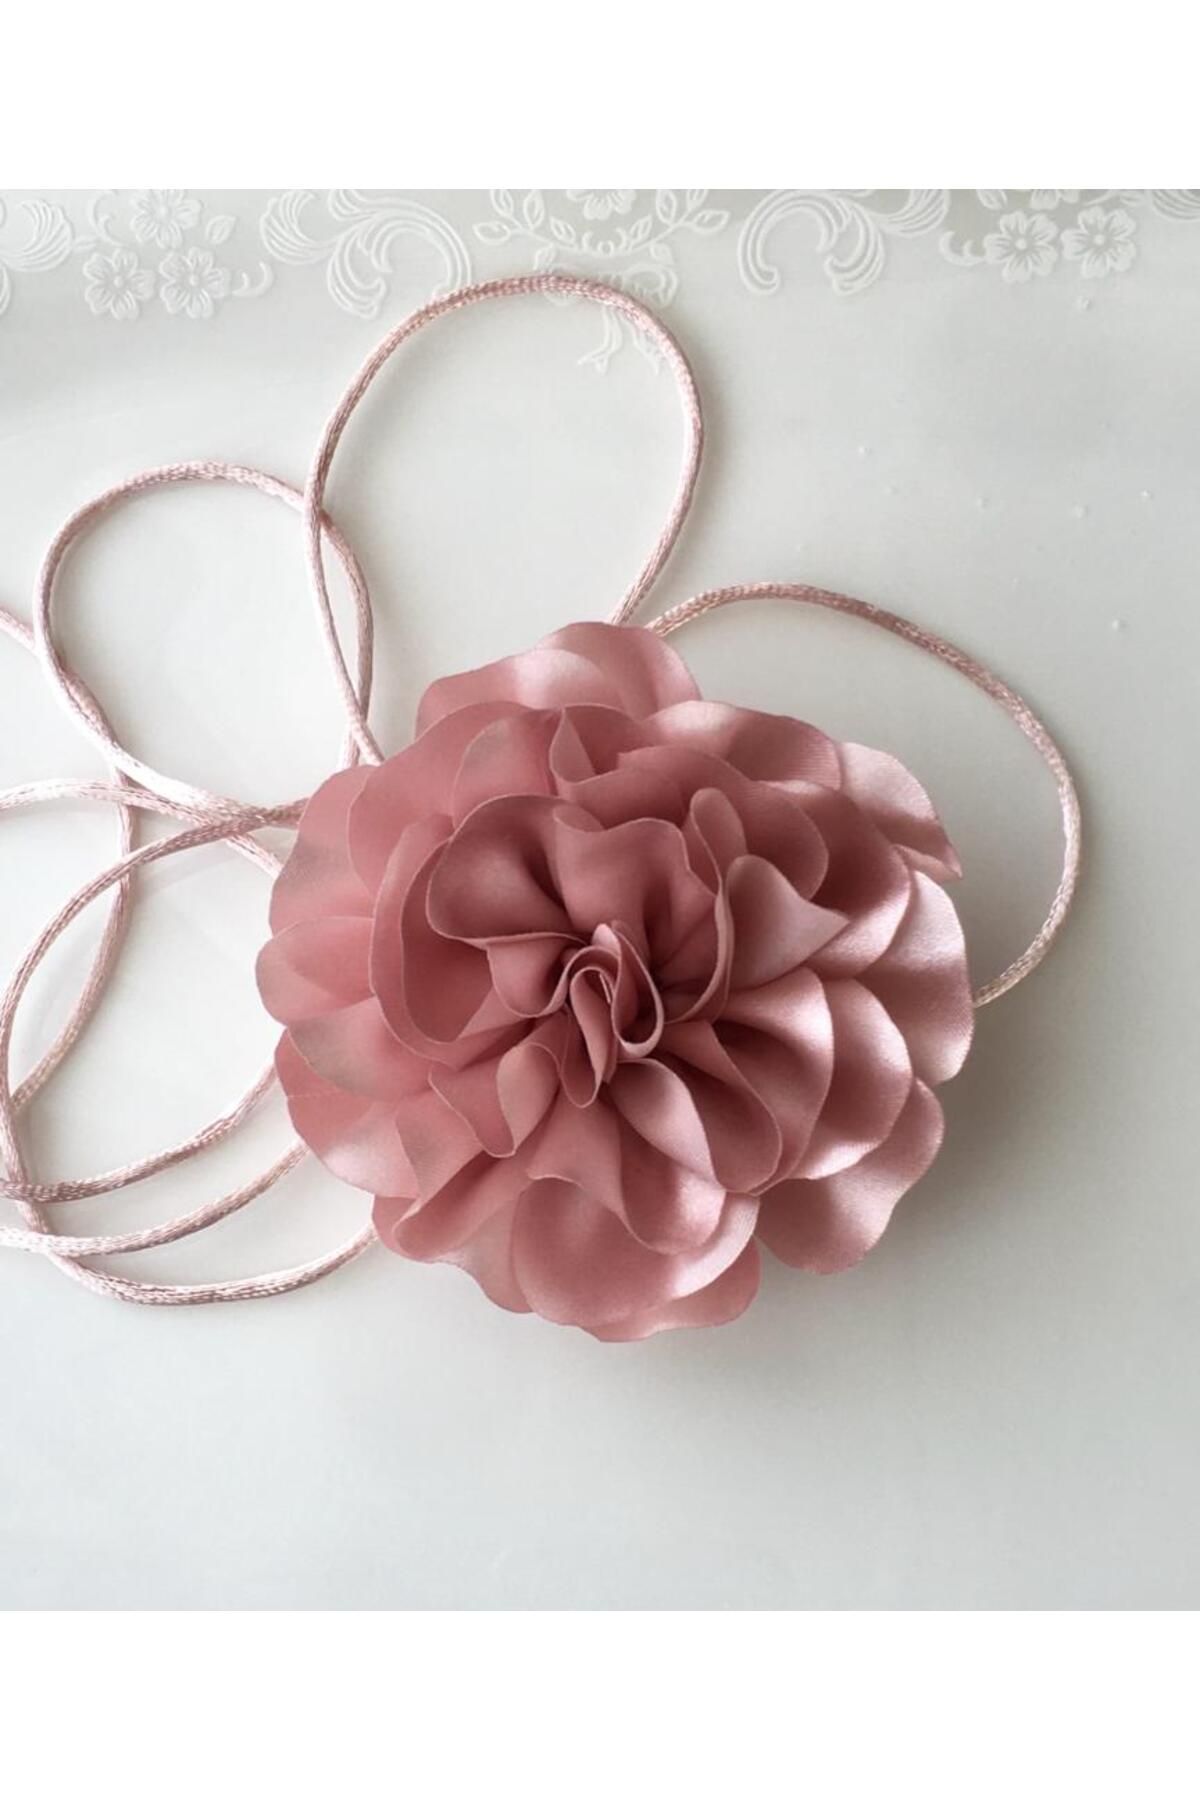 Cute Fabric Flower Necklace : 5 Steps - Instructables